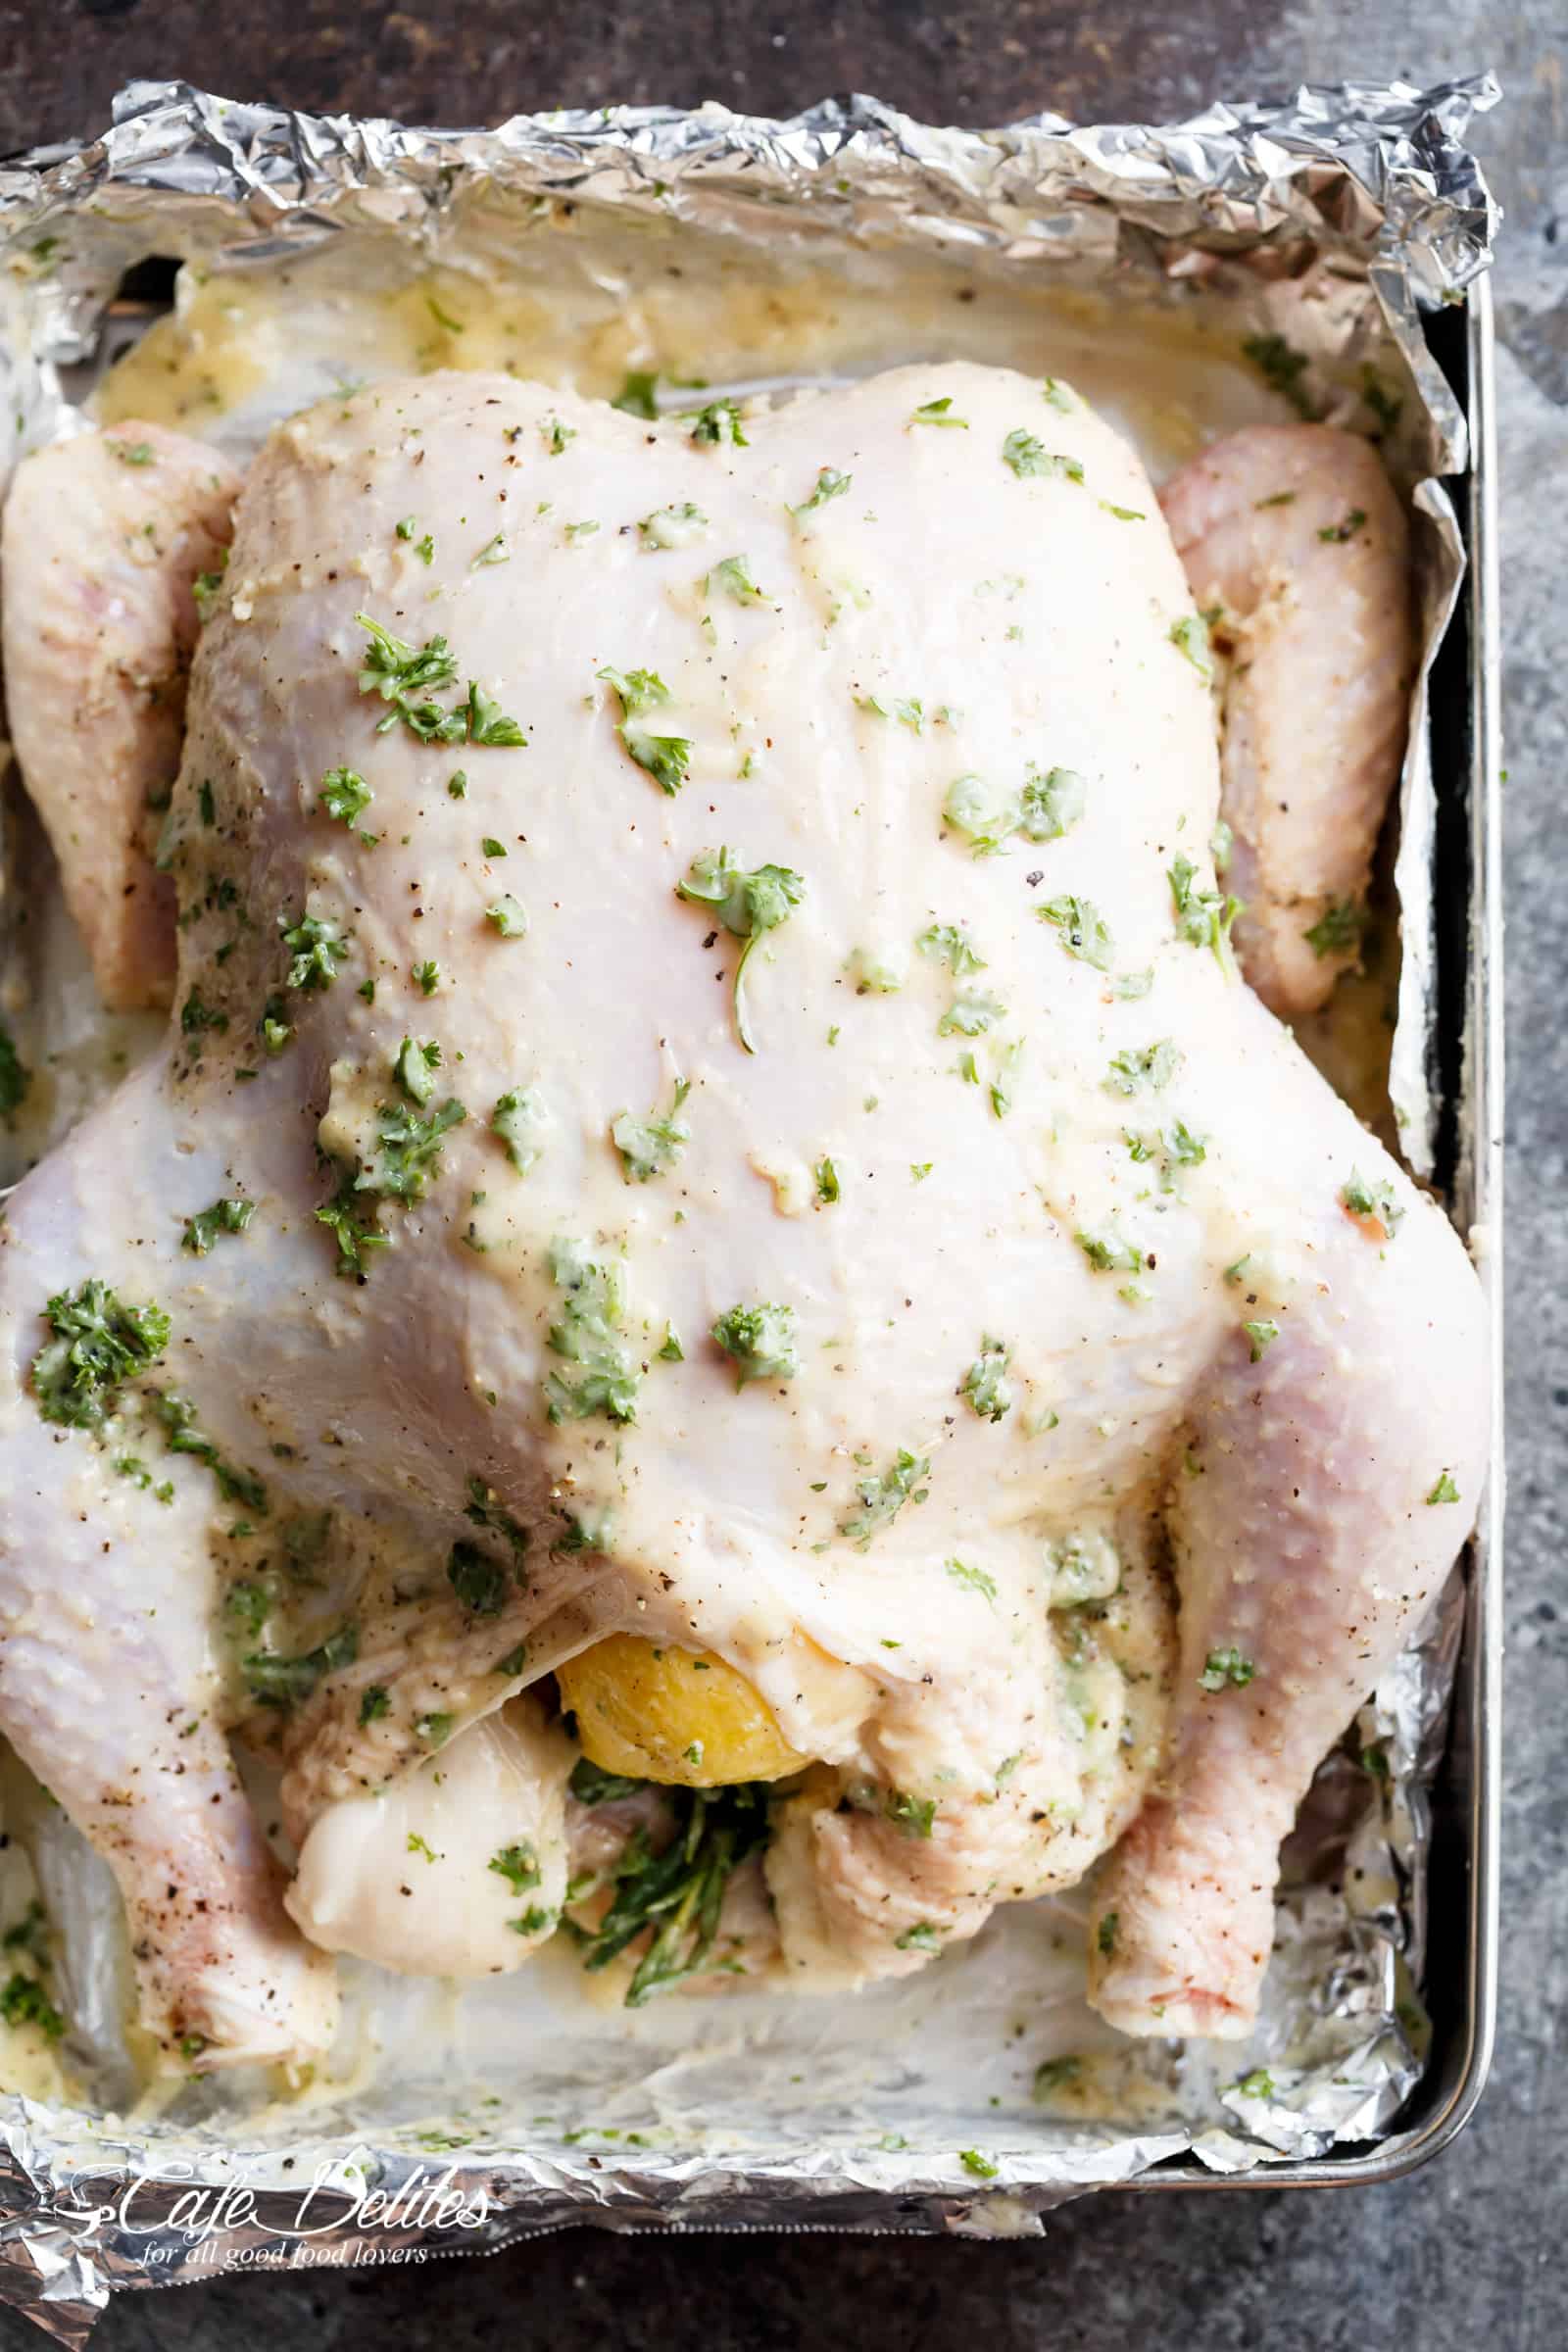 Roast chicken with garlic butter, rosemary, parsley, lemon and a touch of white wine for an unbeatable flavor. | cafedelites.com